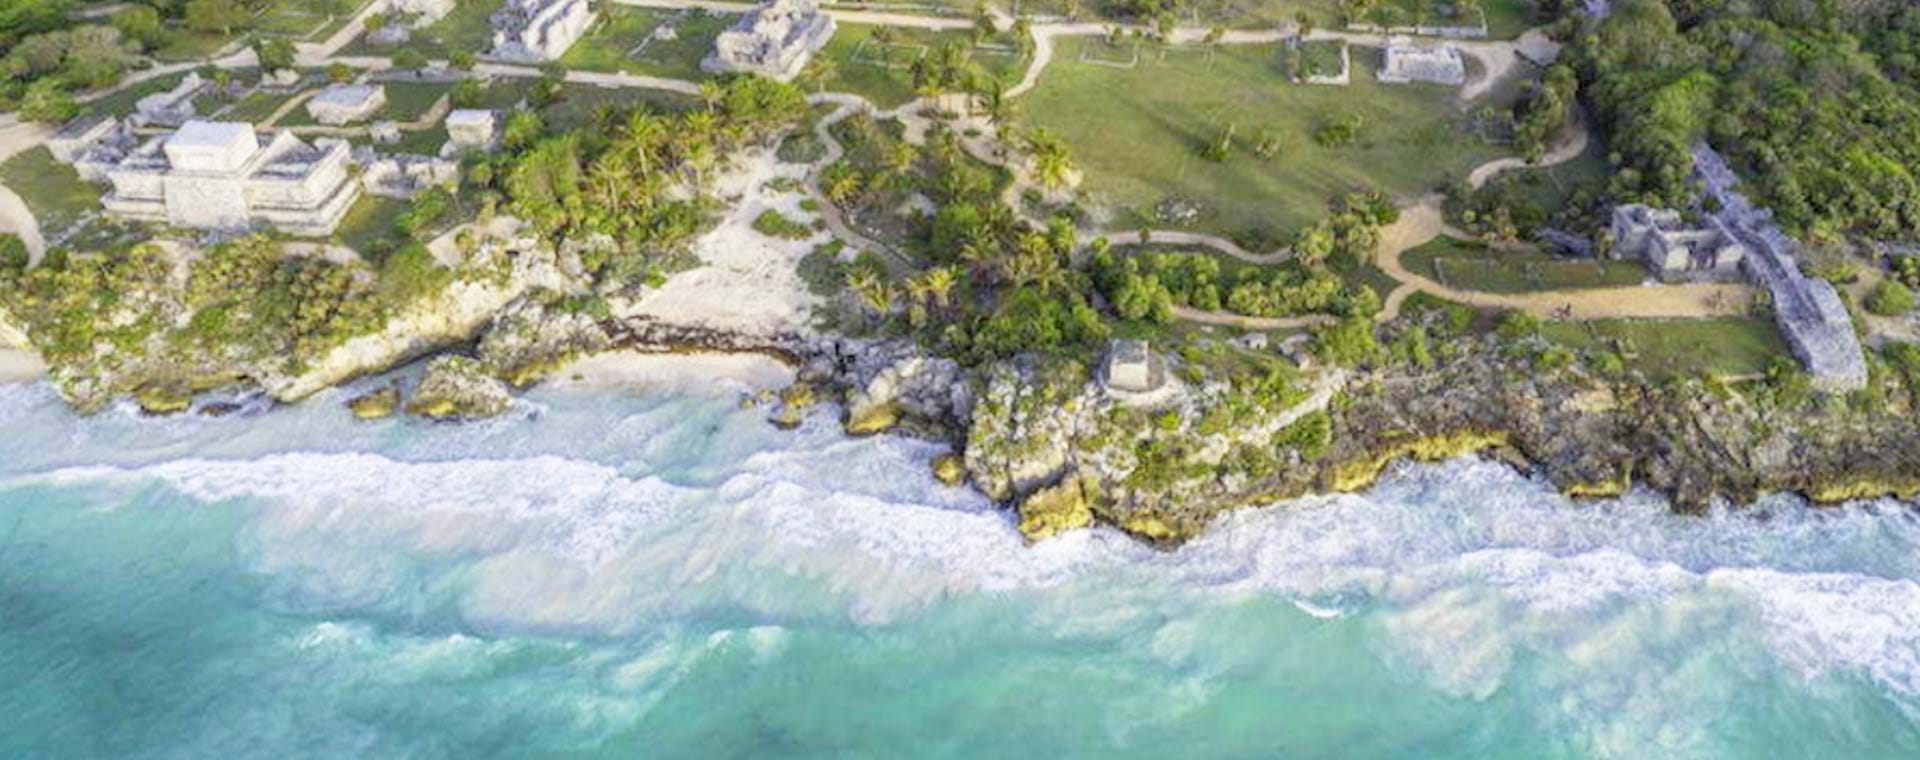 Areal view of Tulum